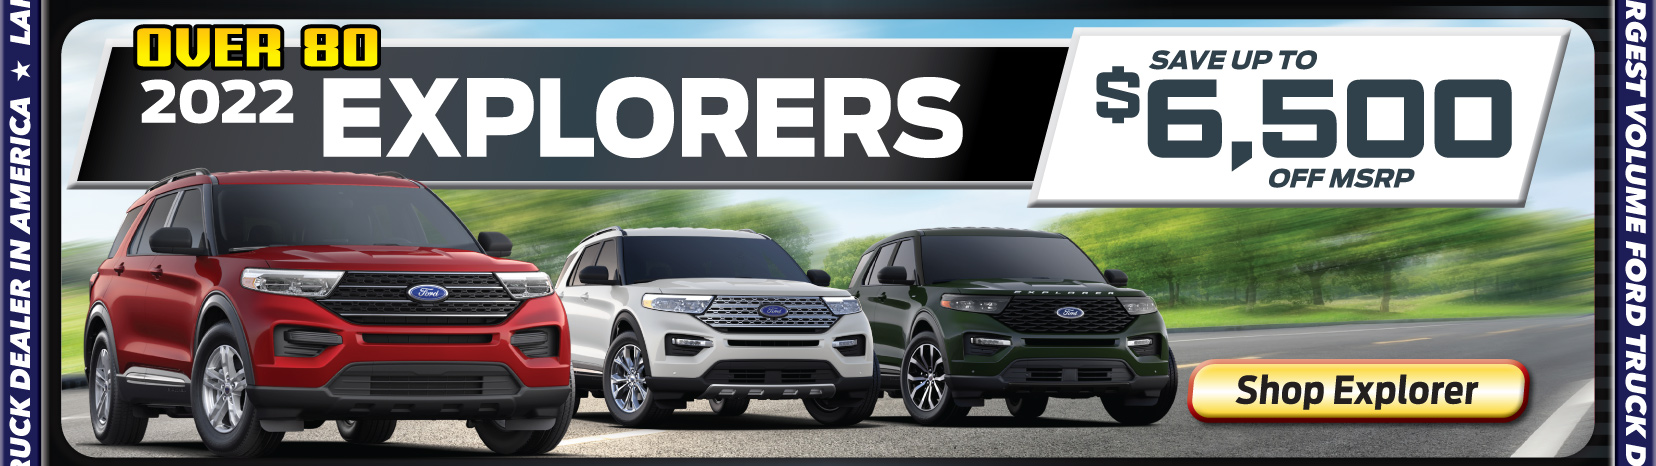 Up To $6,500 off Explorers